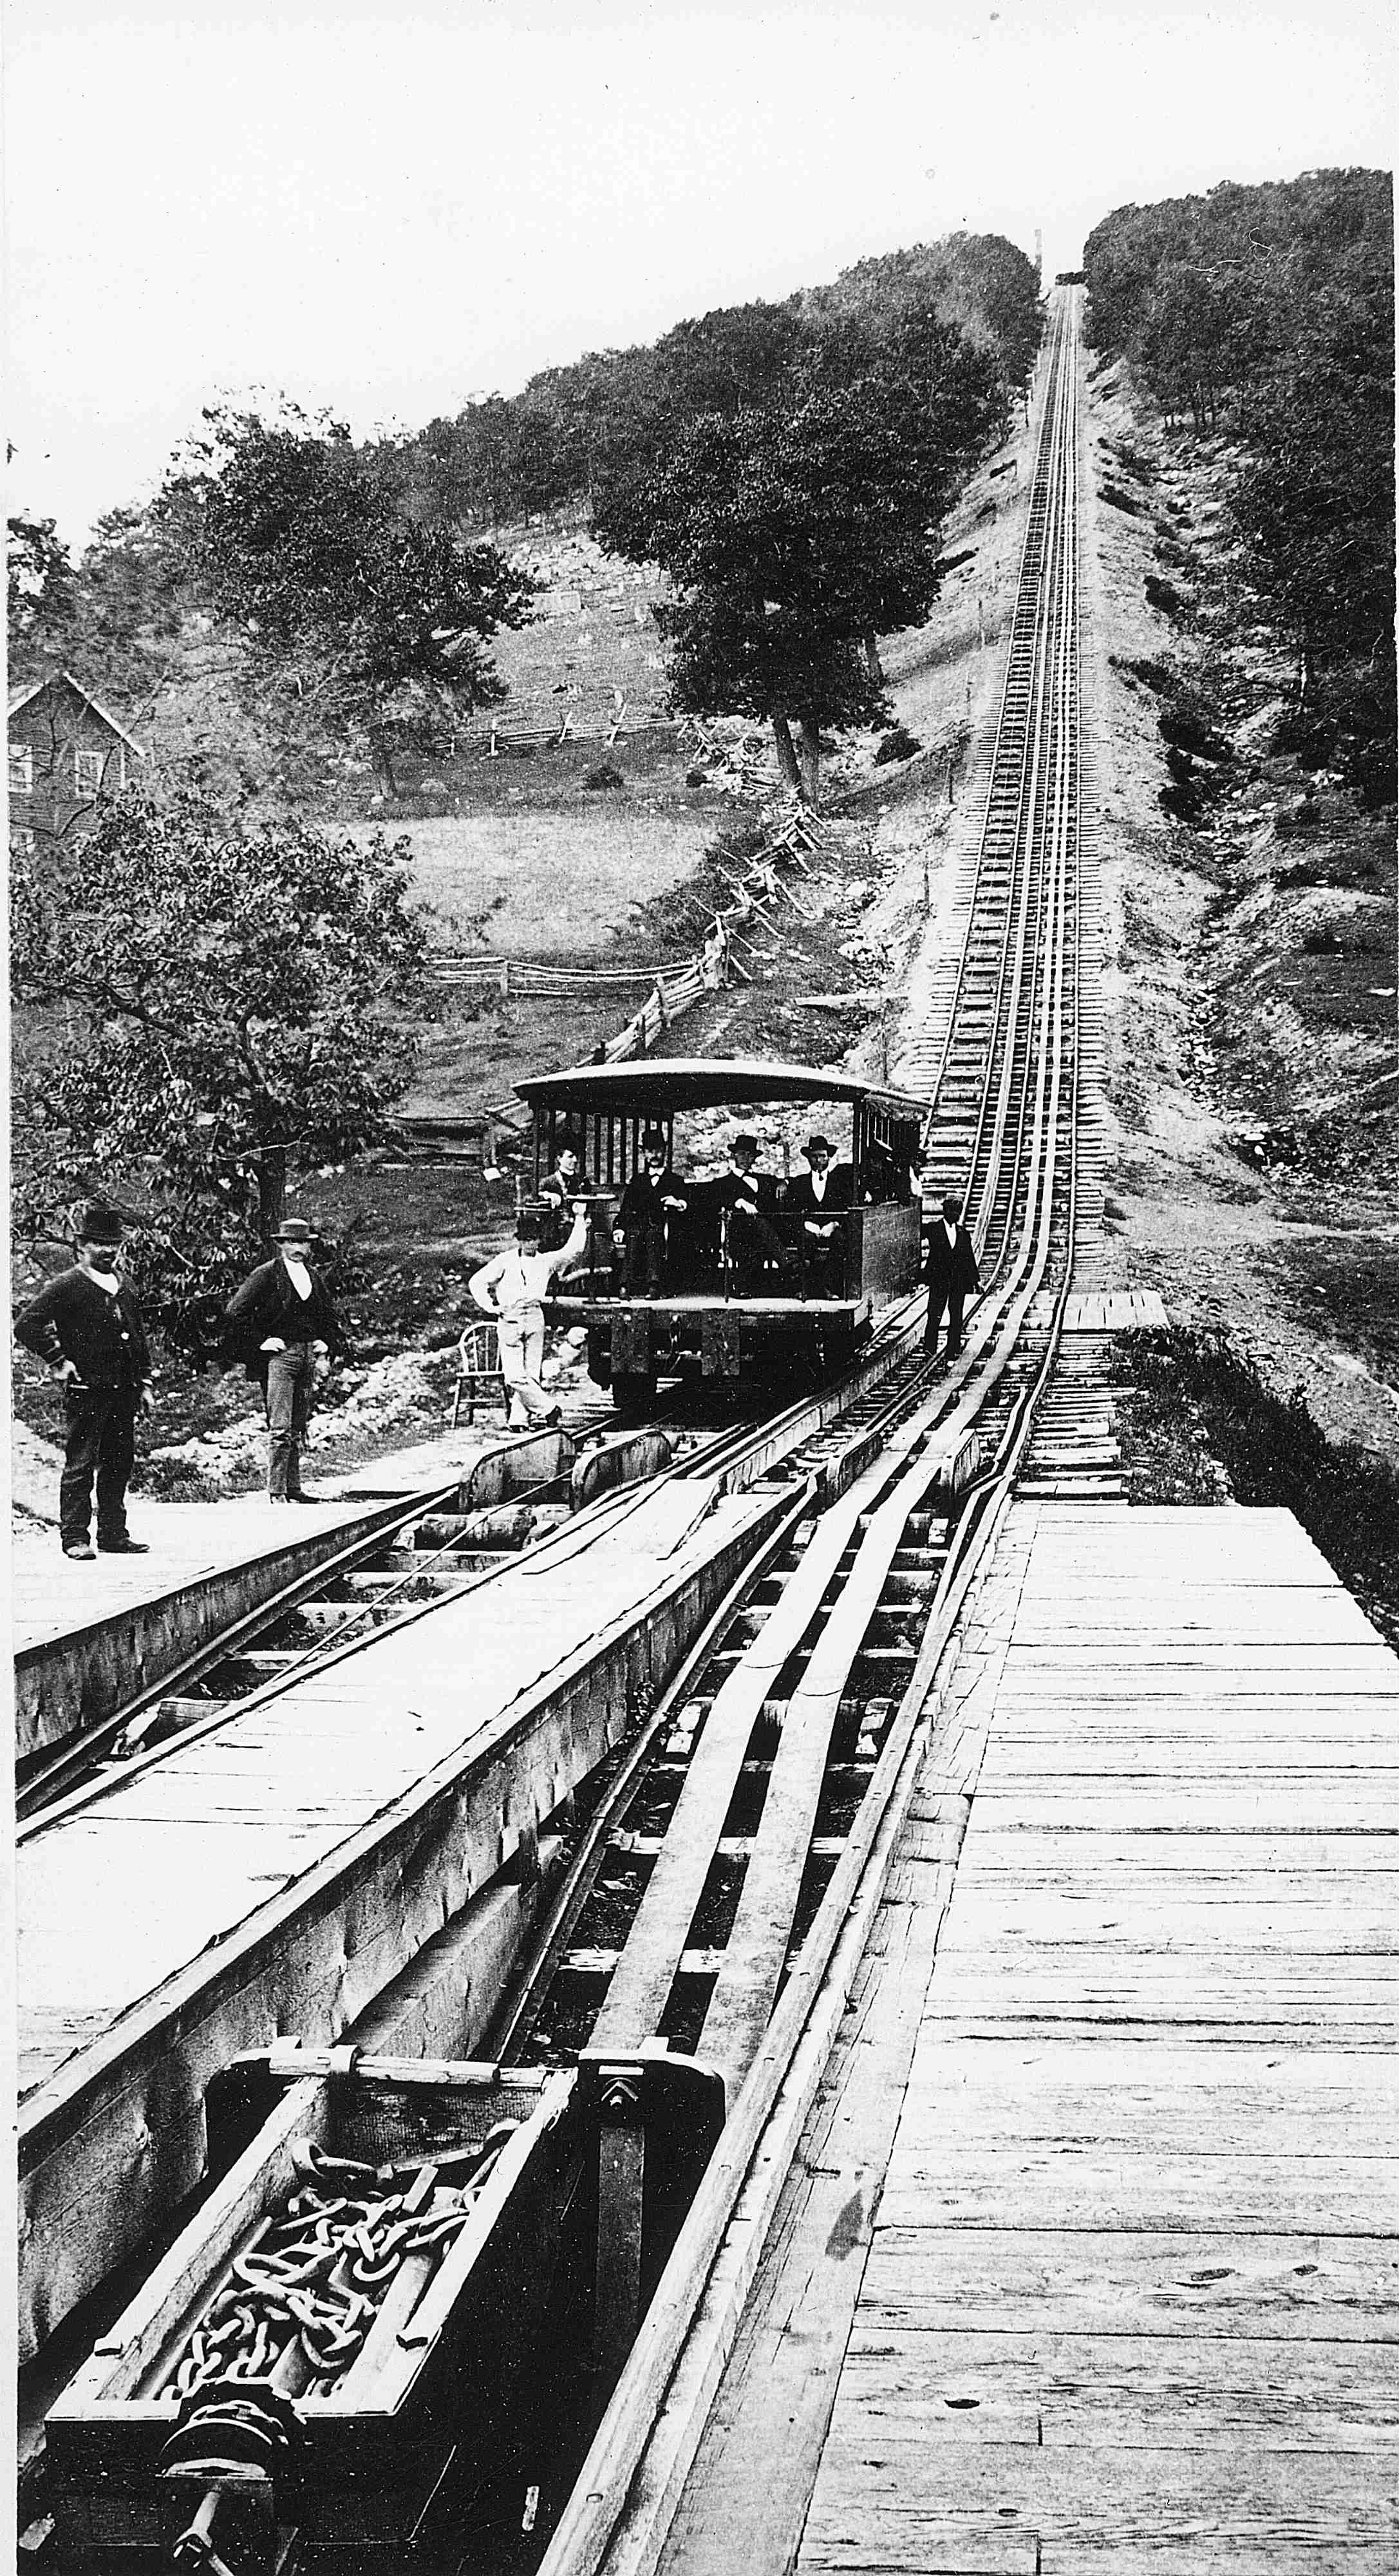 Meet the Author - The Mauch Chunk Switchback: America’s Pioneer Railroad